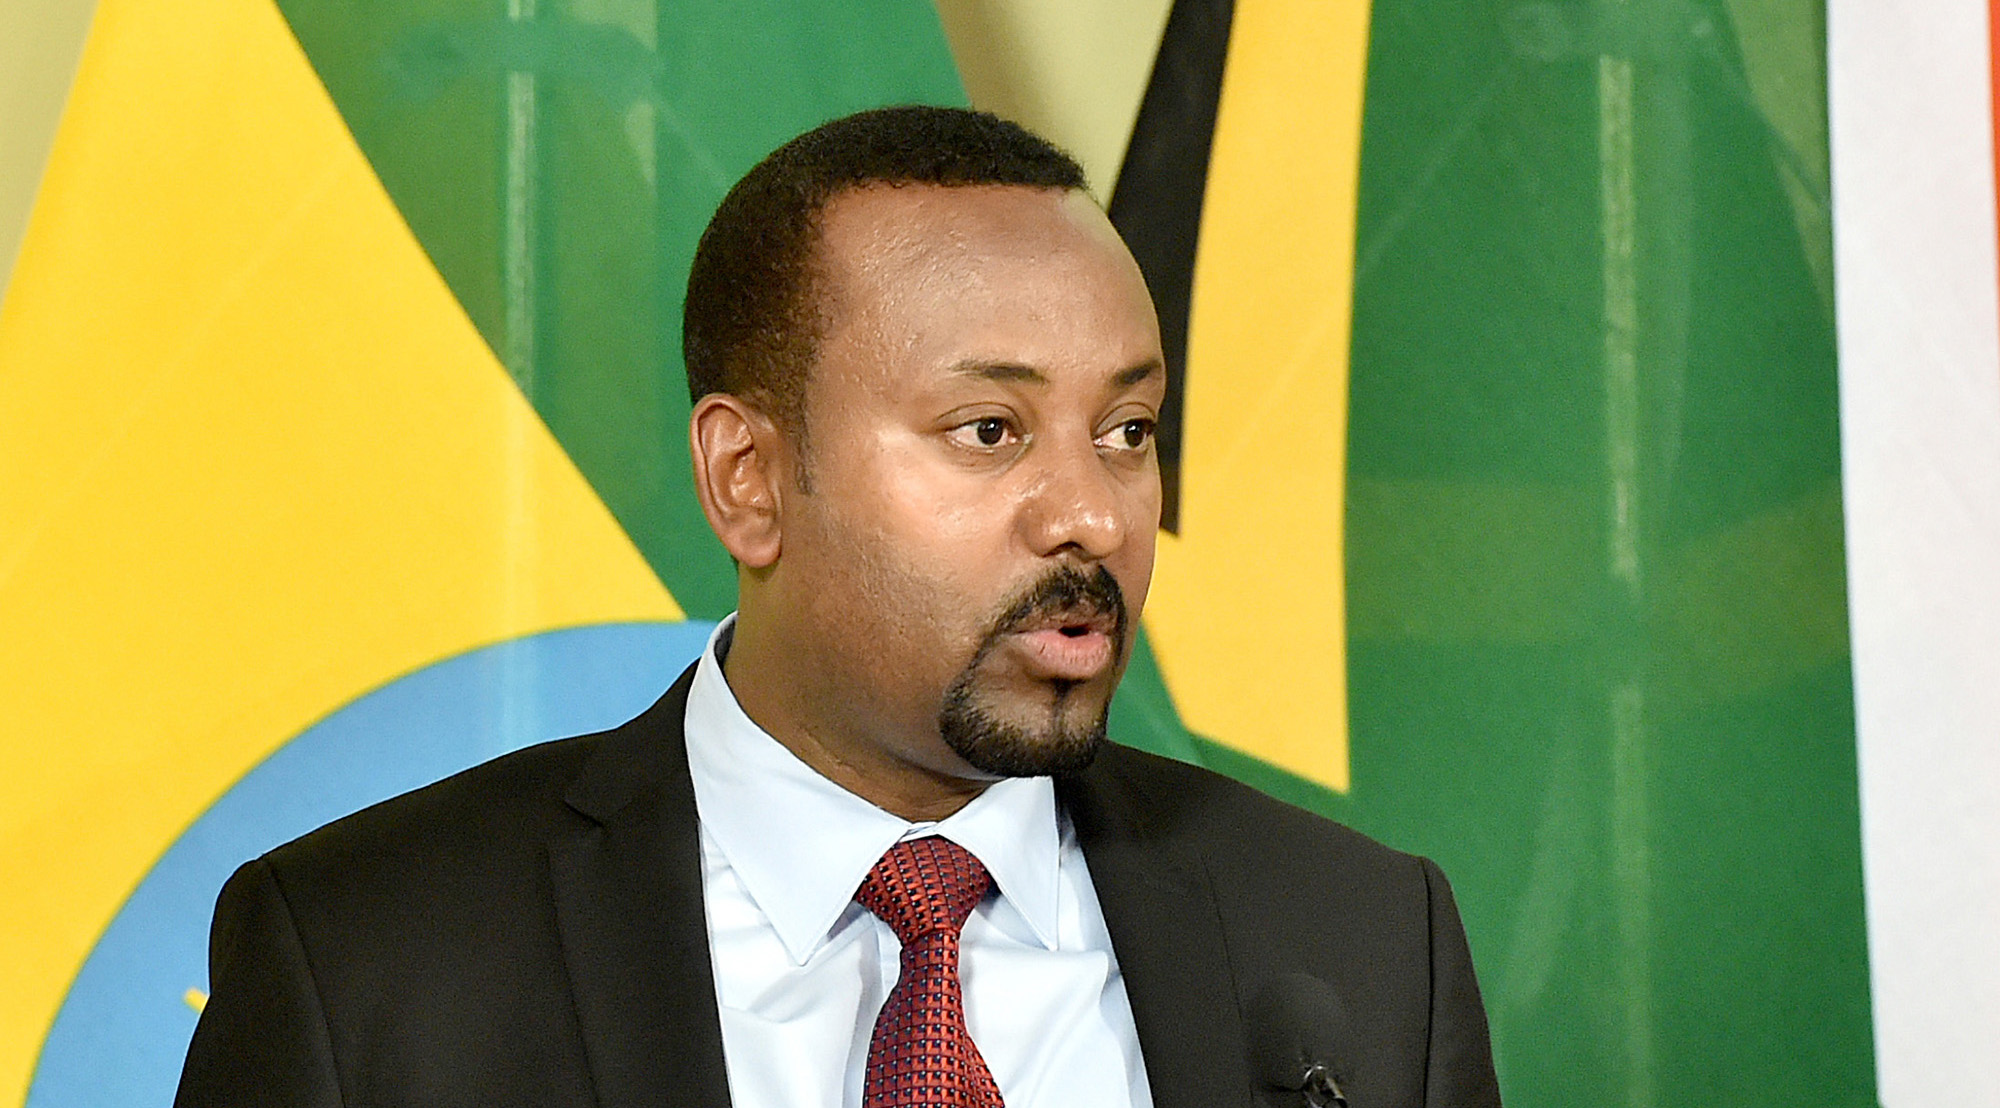 Interview with Paulos Asfaha - Abiy Ahmed’s Popularity Declines as Elections Approach